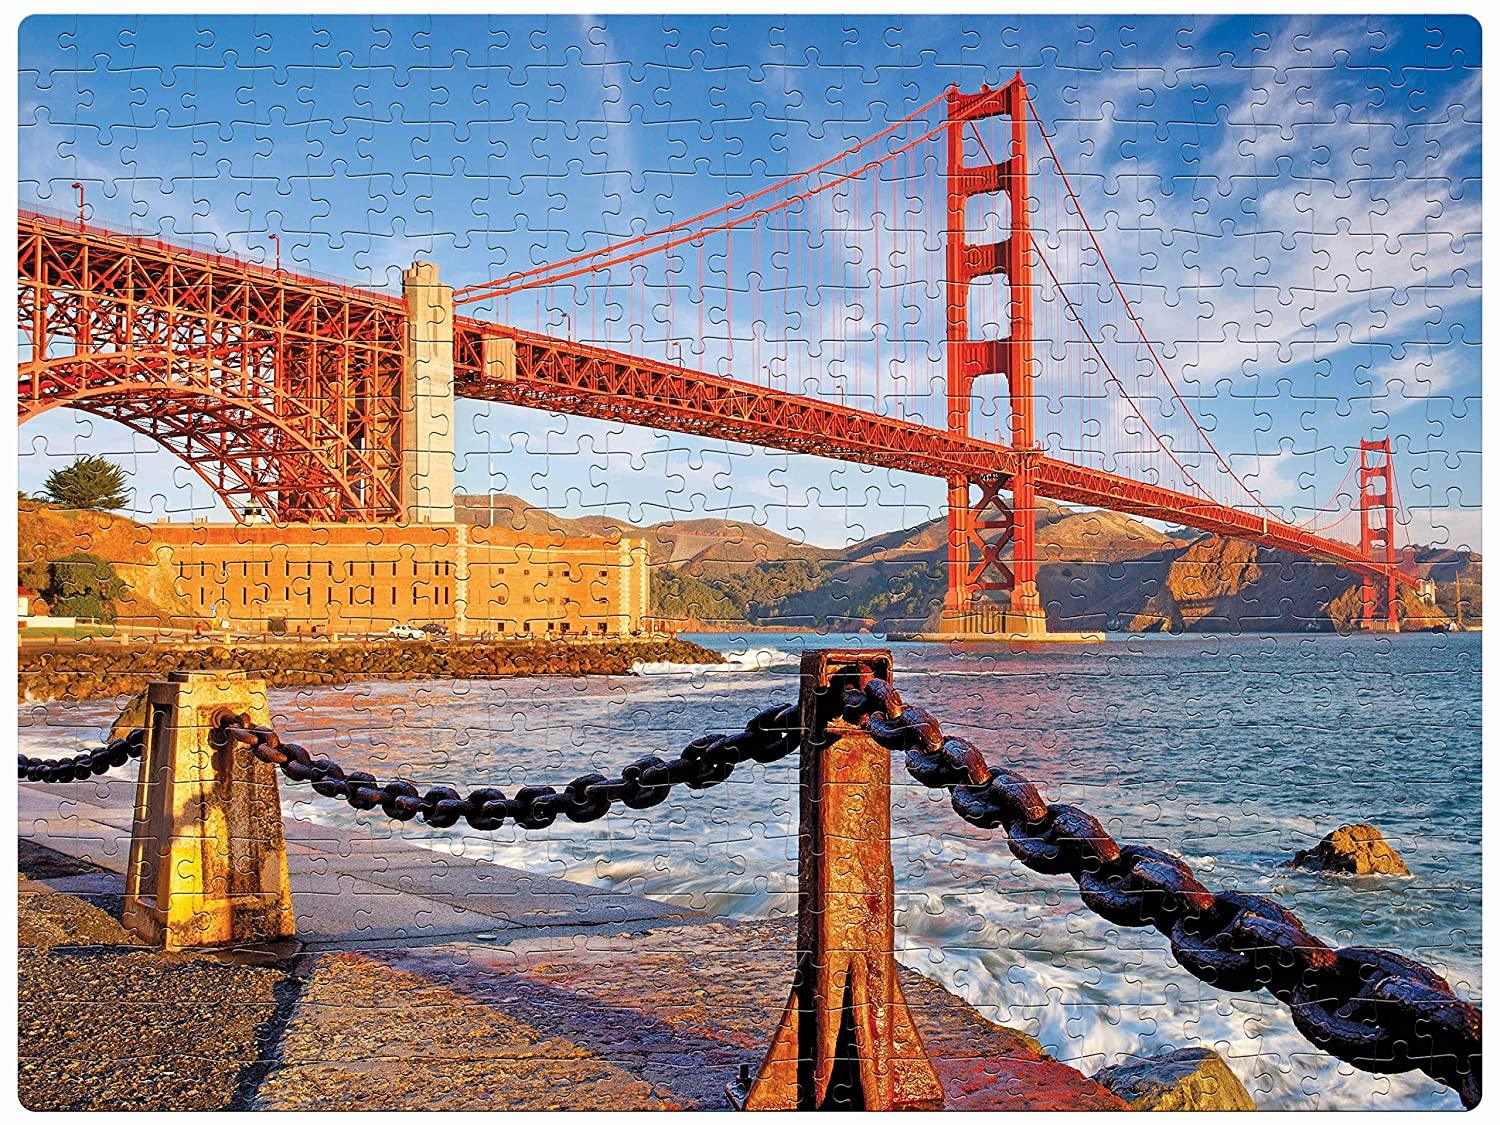 Frank Golden Gate Bridge 500 Pieces Jigsaw Puzzle for 10 Year Old Kids and Above